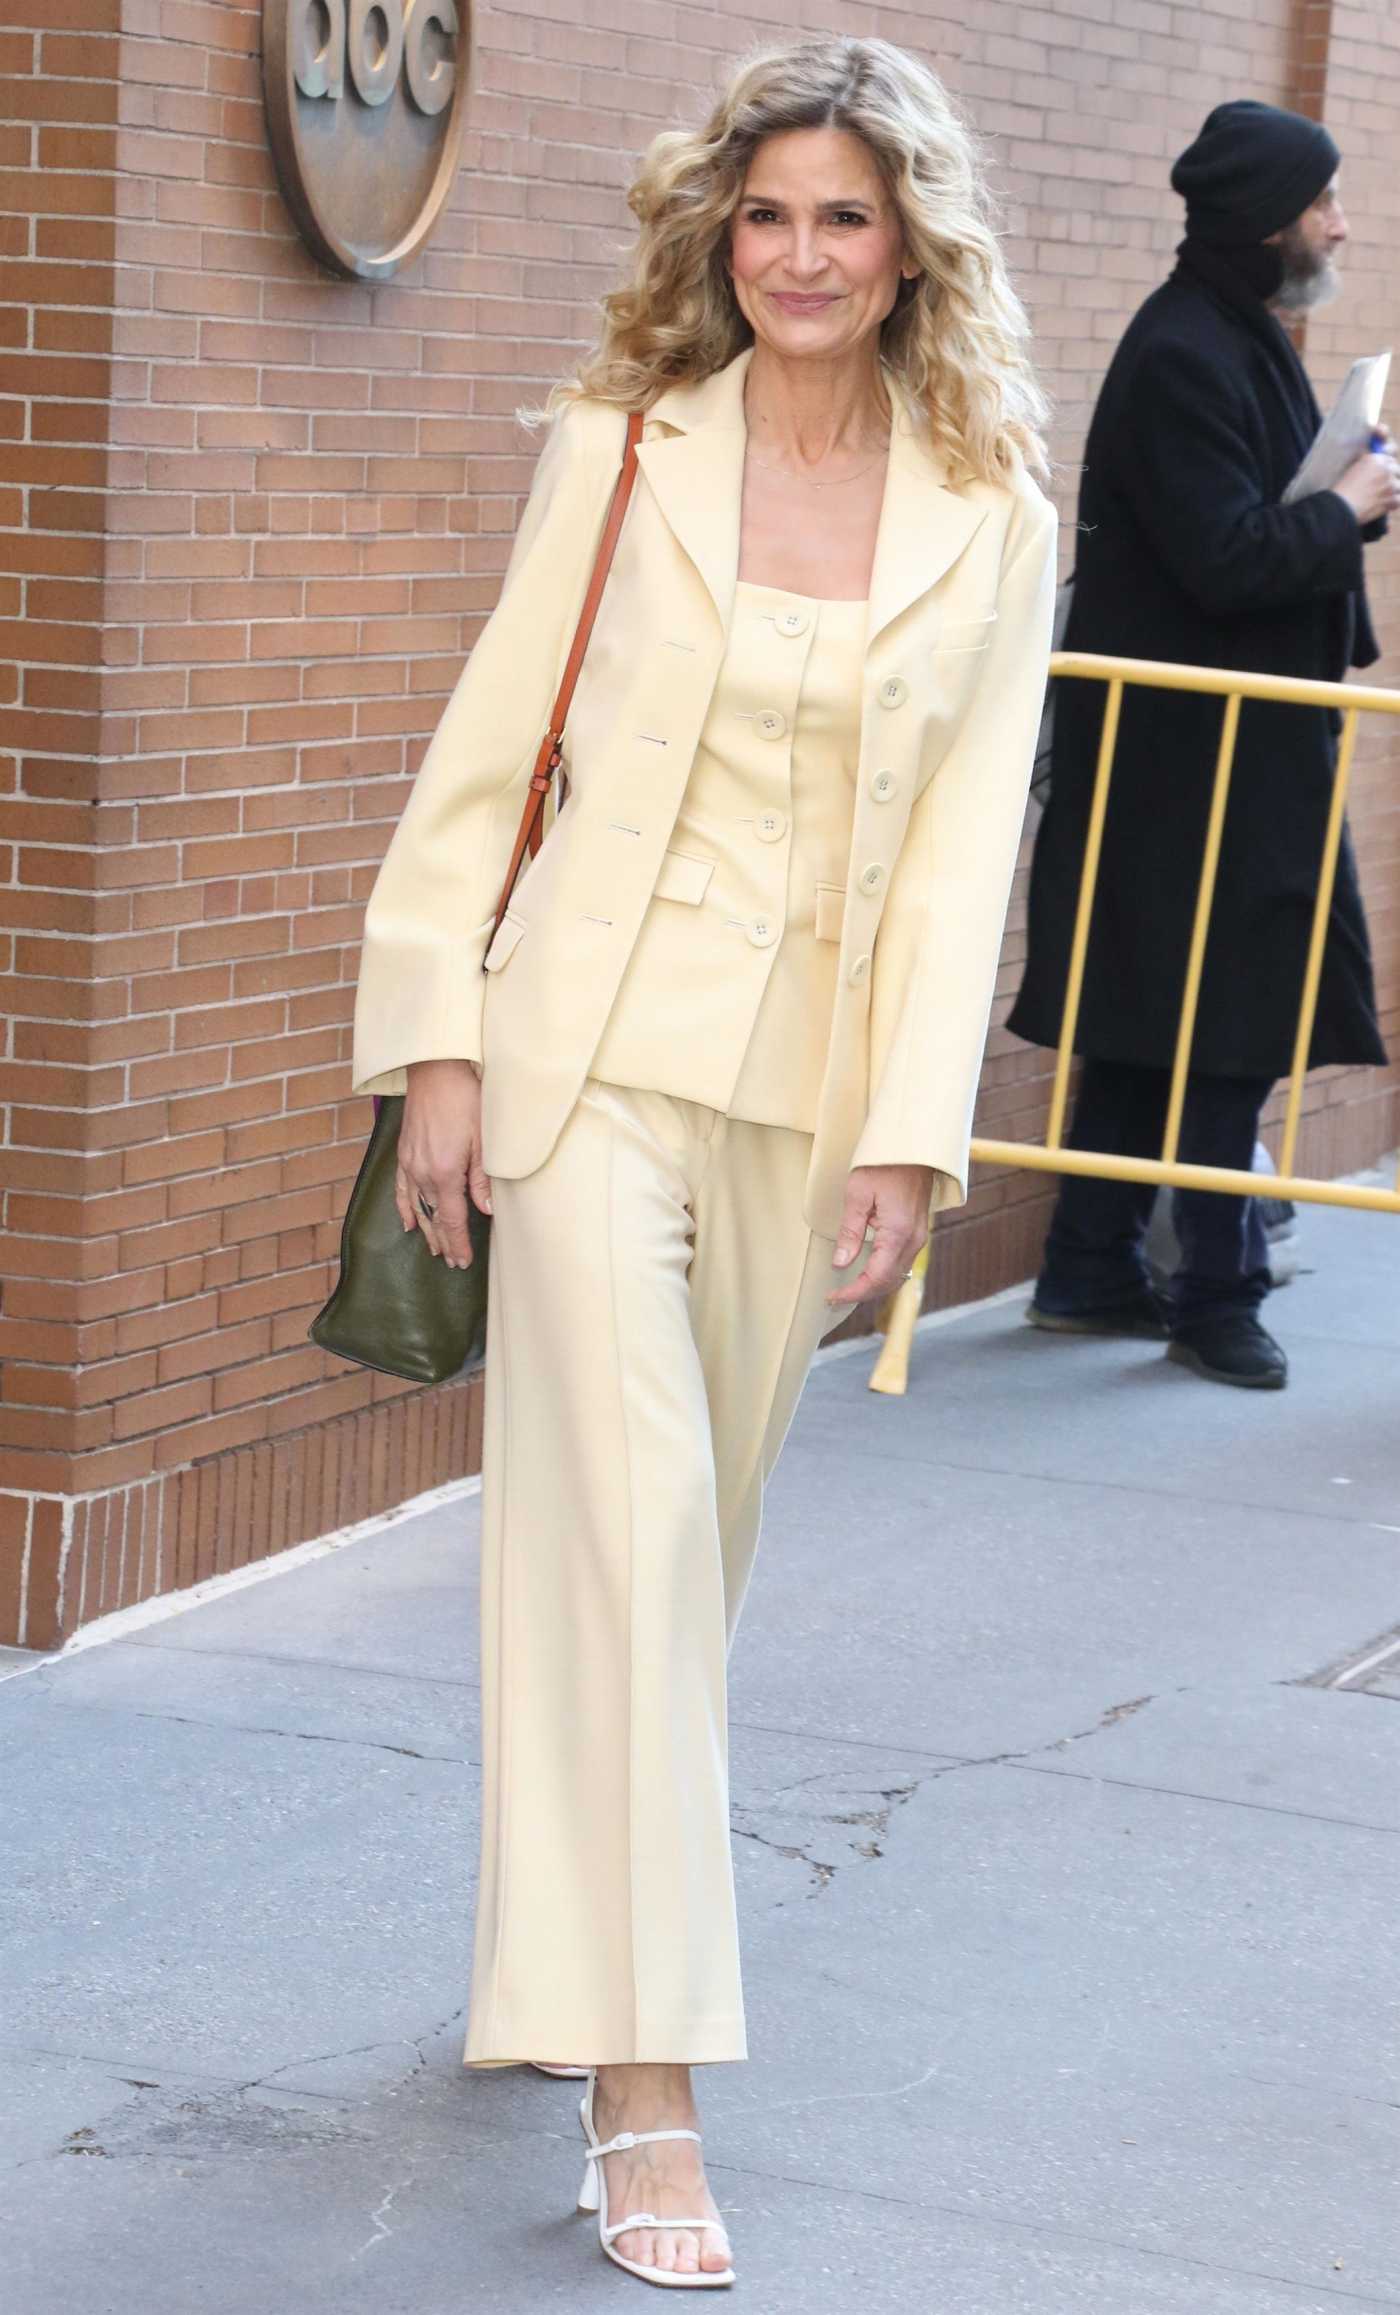 Kyra Sedgwick in a Beige Pantsuit Exits The View in New York 03/30/2023